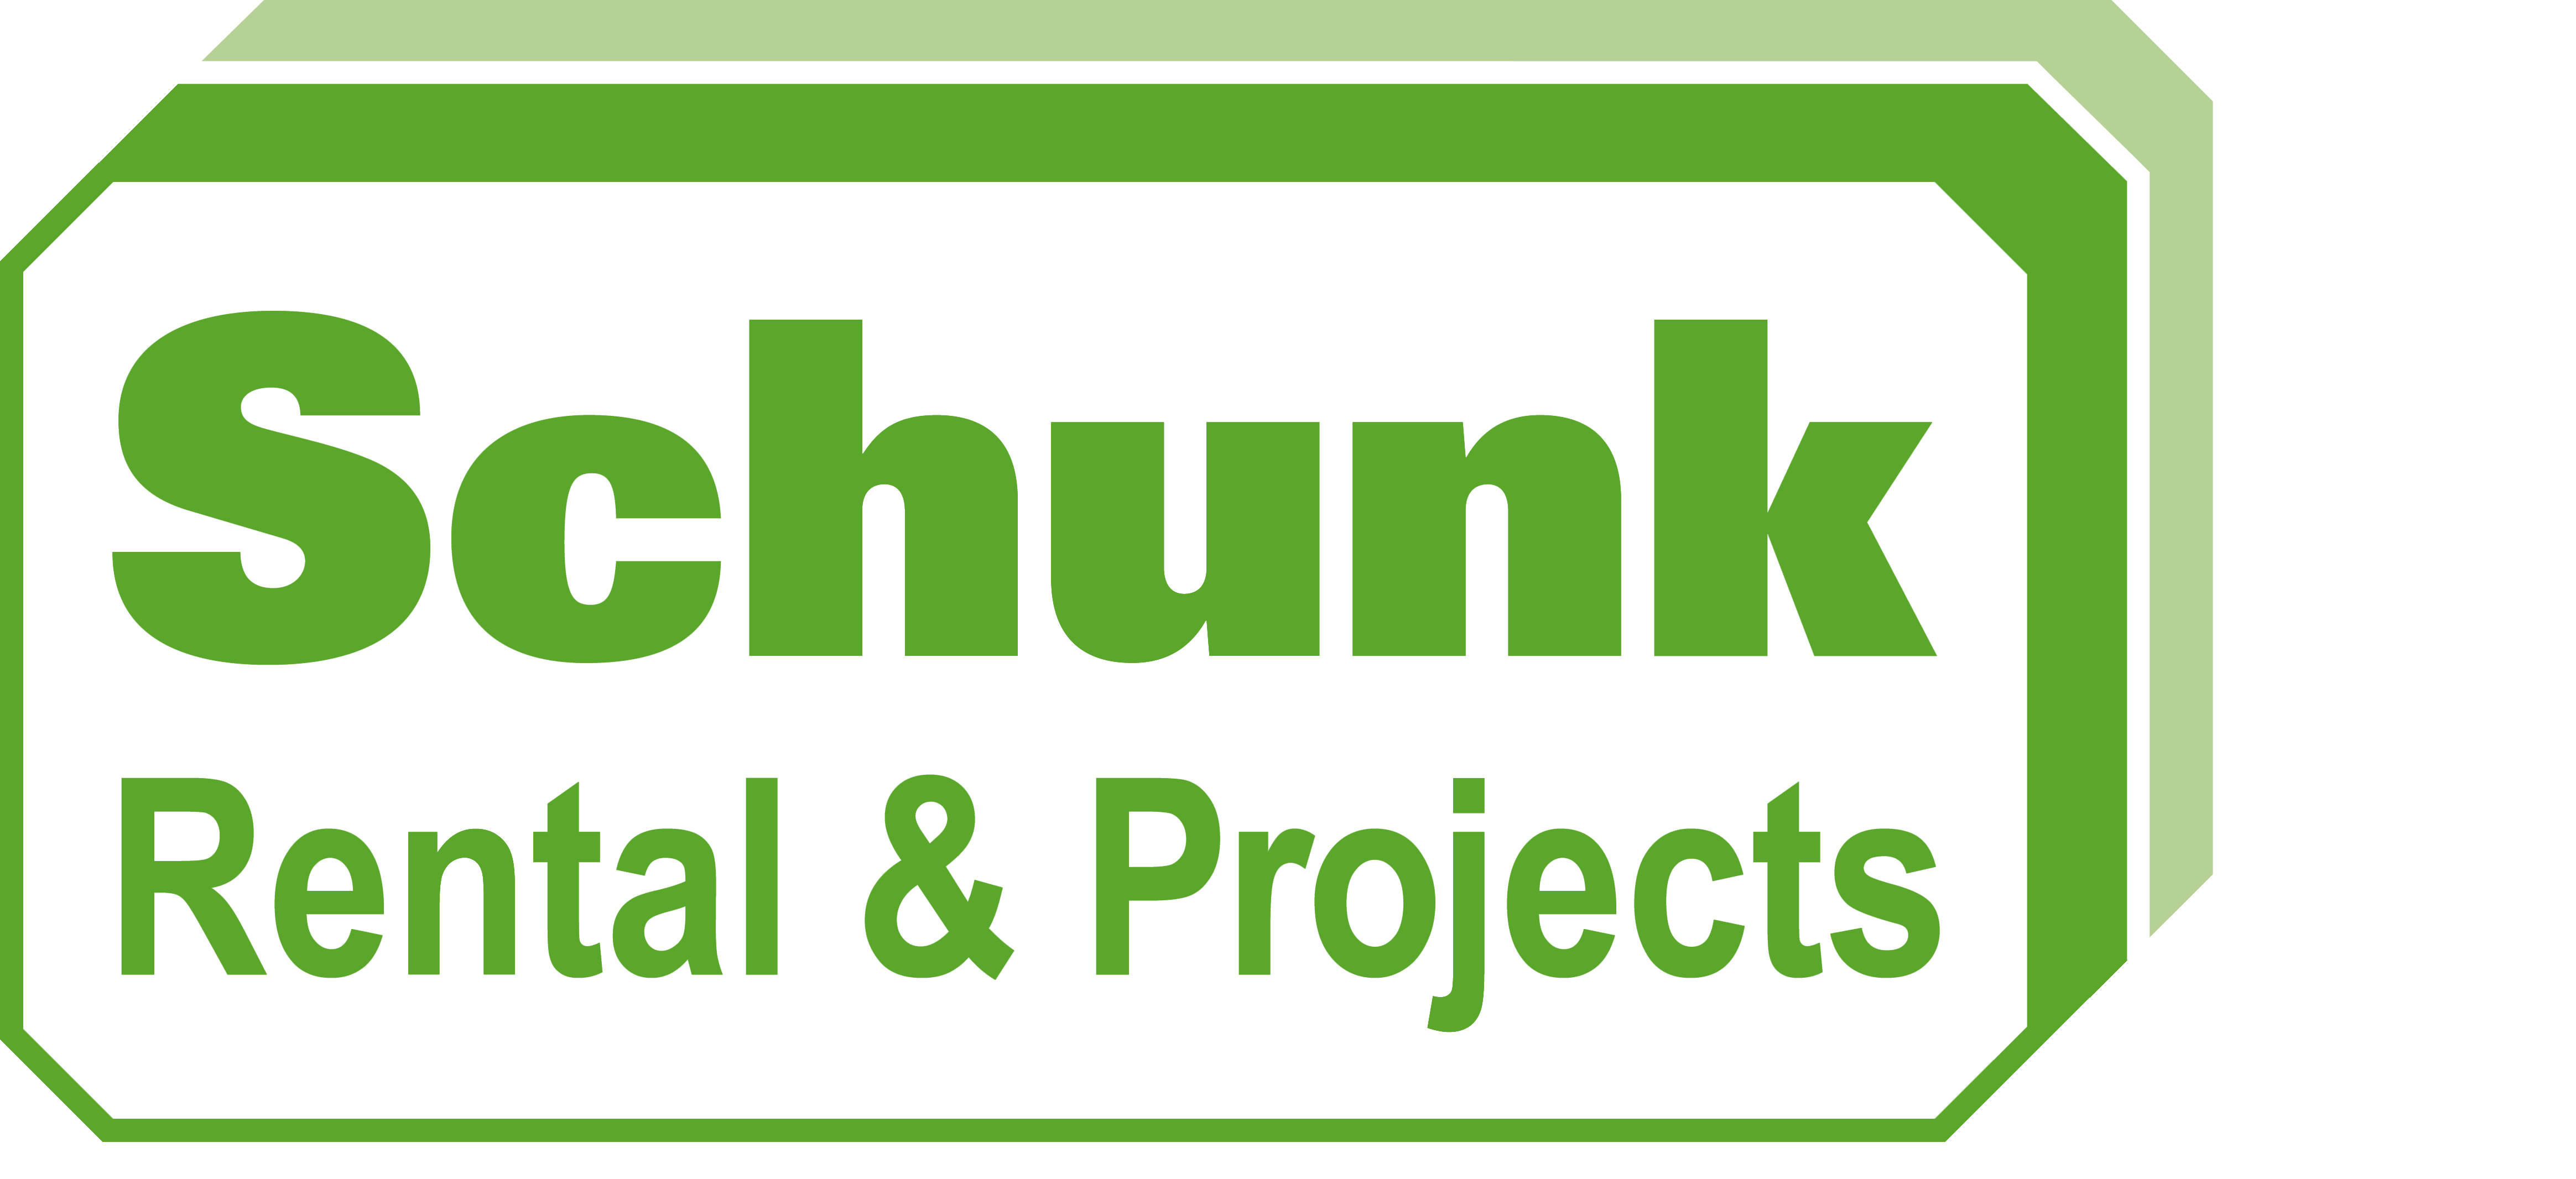 Schunk Rental & Projects